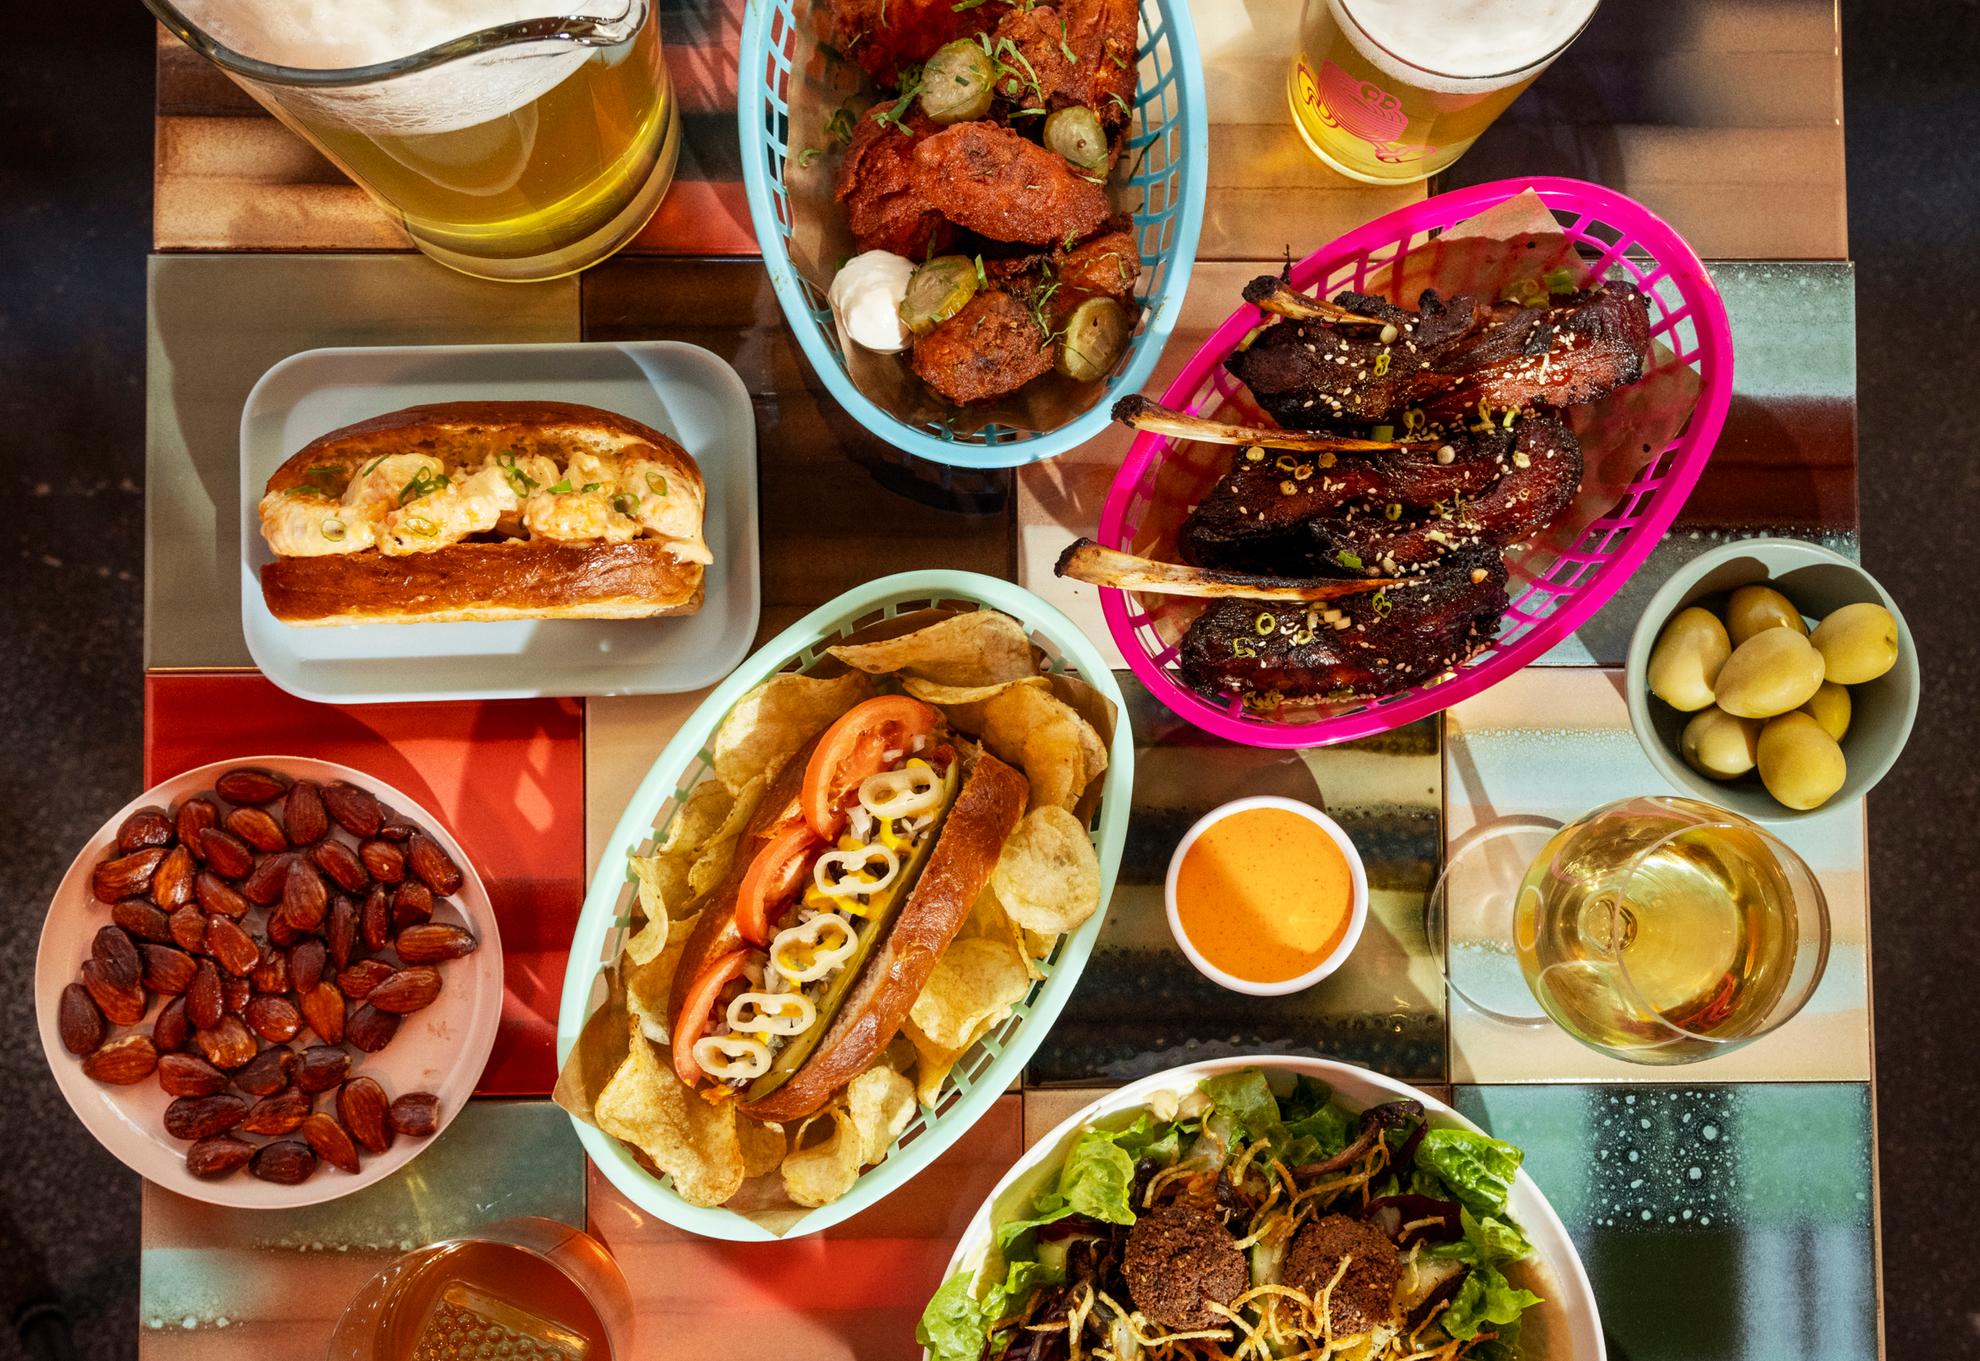 A square table filled with colourful streetfood in different baskets and on plates, as well as glasses of beer and wine.